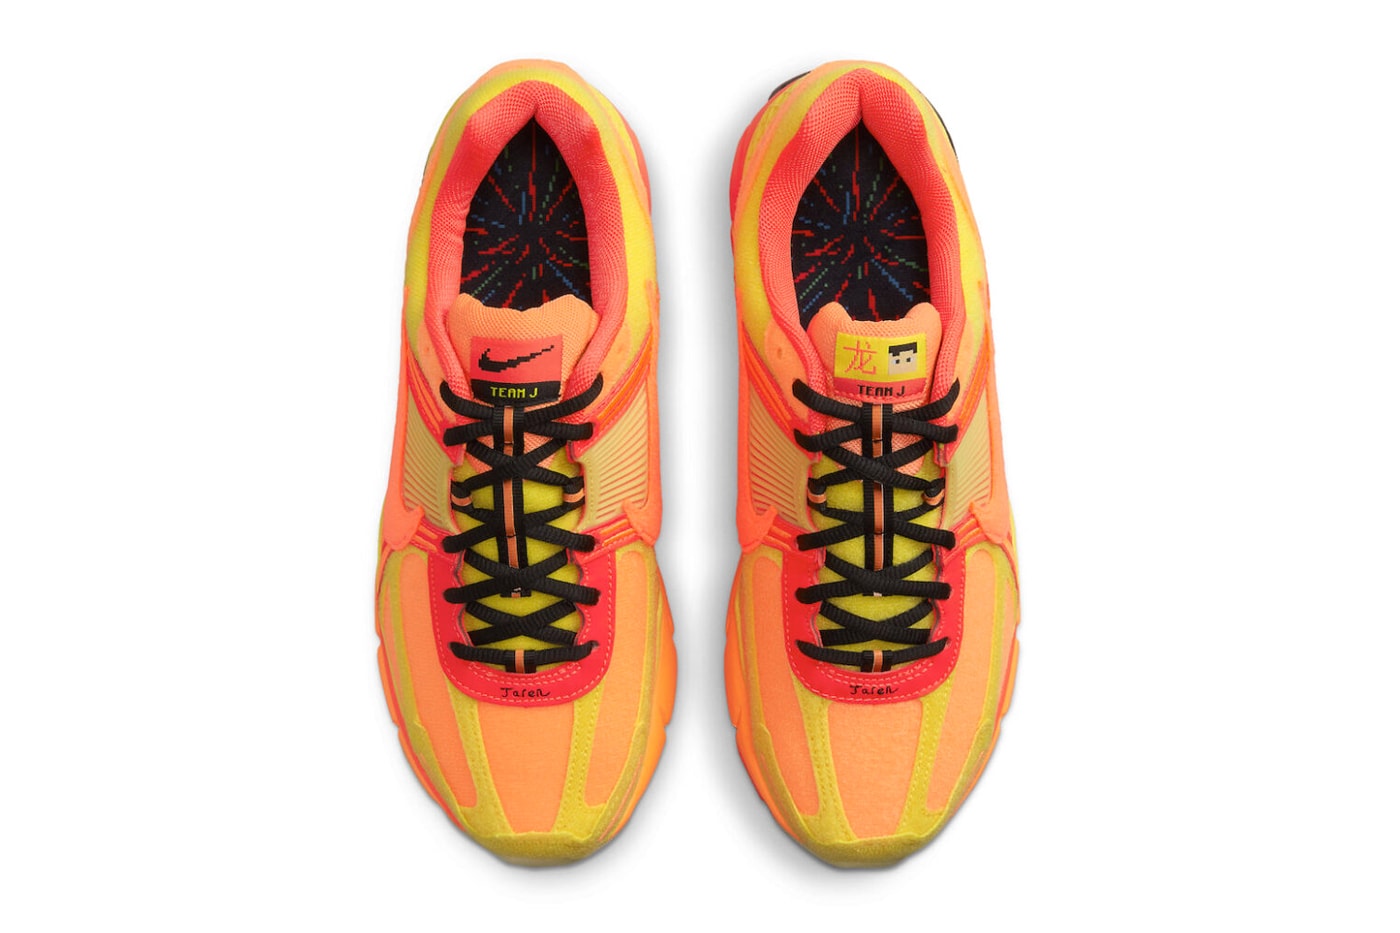 Nike Zoom Vomero 5 Doernbecher official look yellow orange jaren heacock cleft palate chinese dragon siblings release info date price